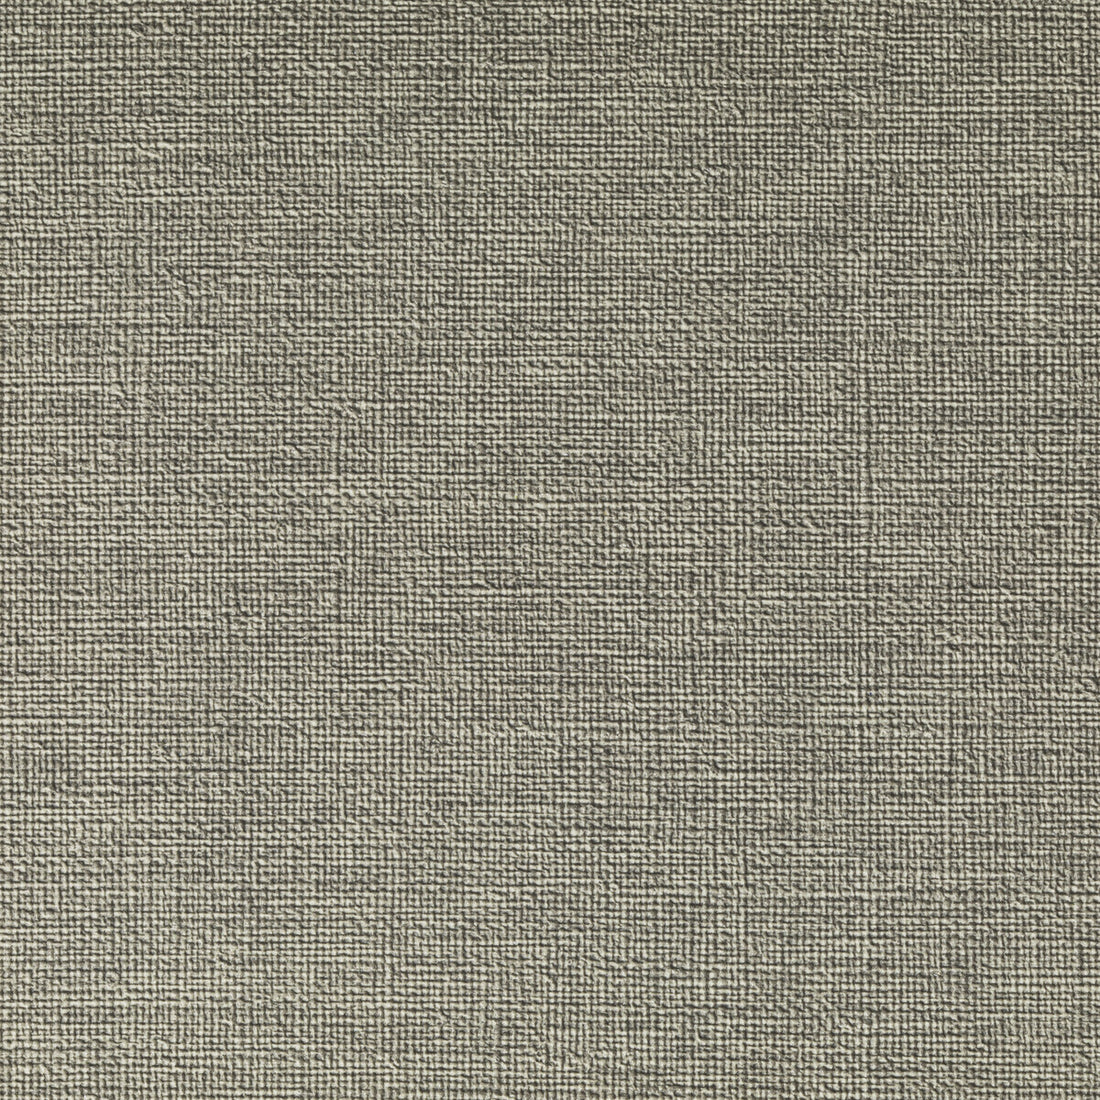 Caslin fabric in hemp color - pattern CASLIN.16.0 - by Kravet Contract in the Foundations / Value collection